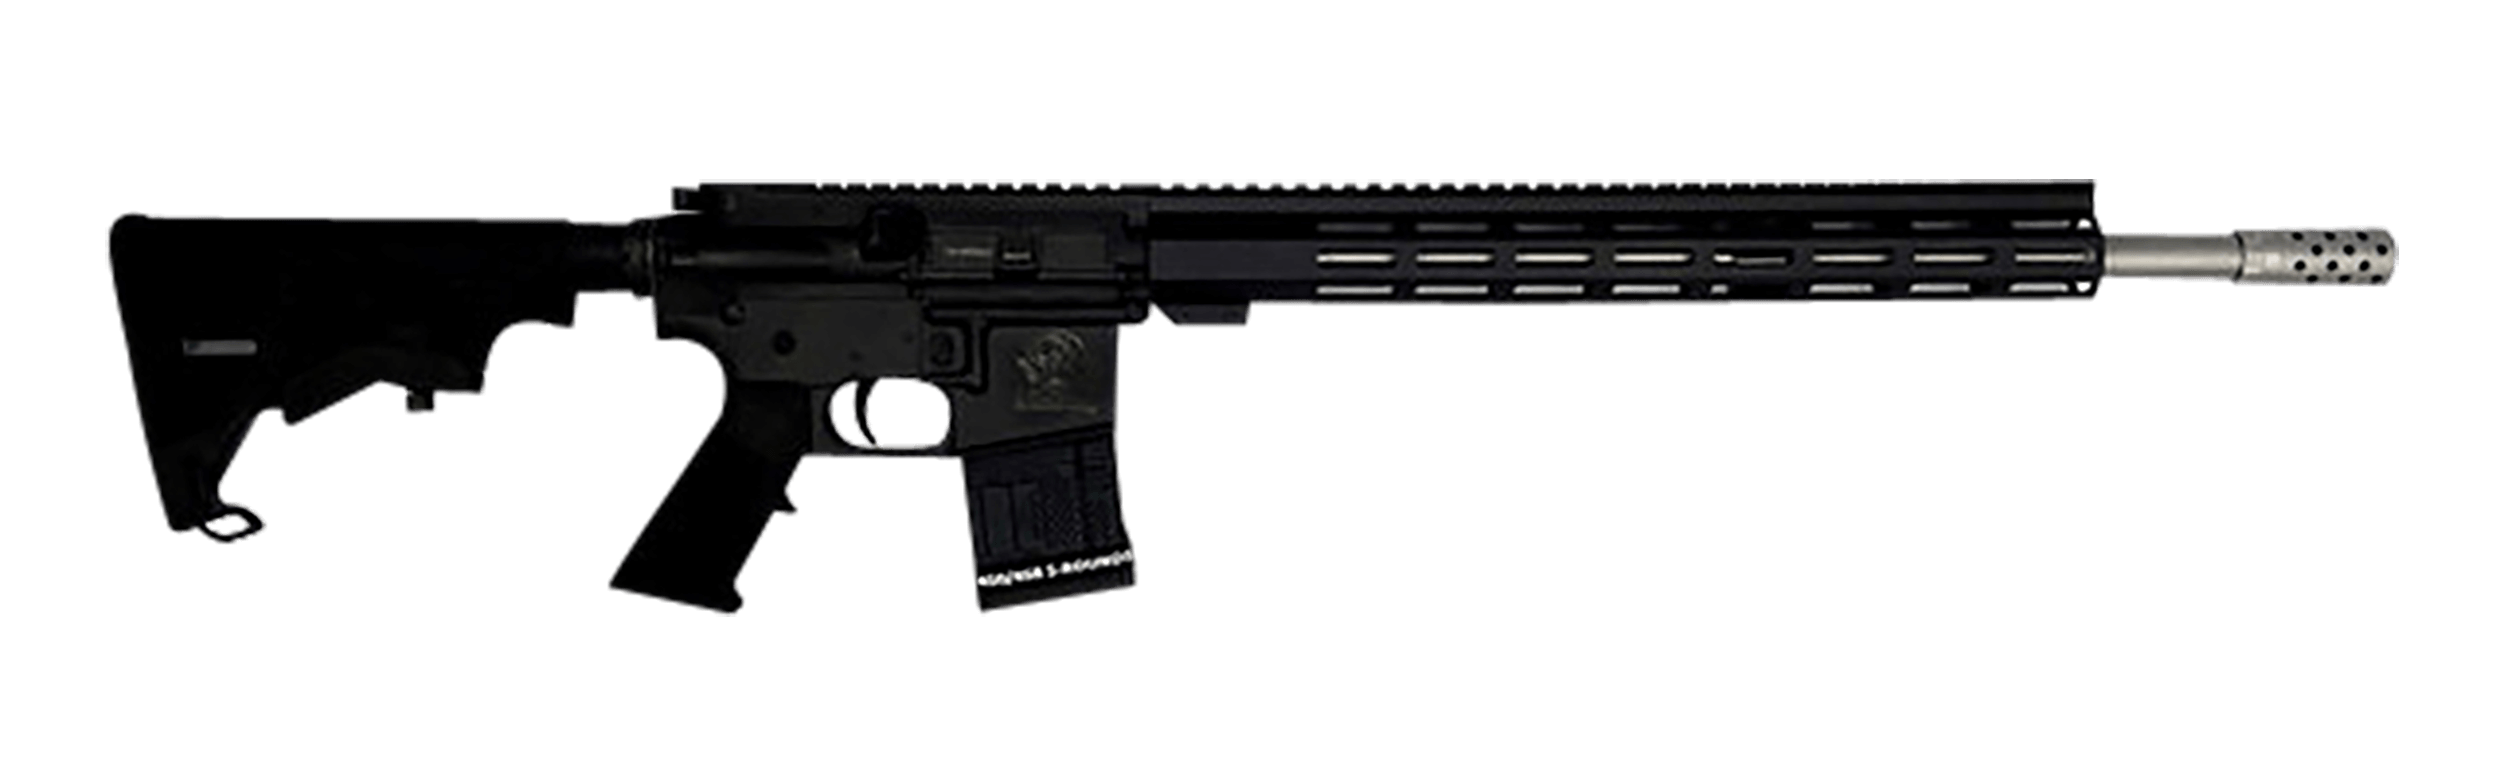 Great Lakes Firearms AR-15 450 Bushmaster 5+1 18″ Stainless Barrel ...